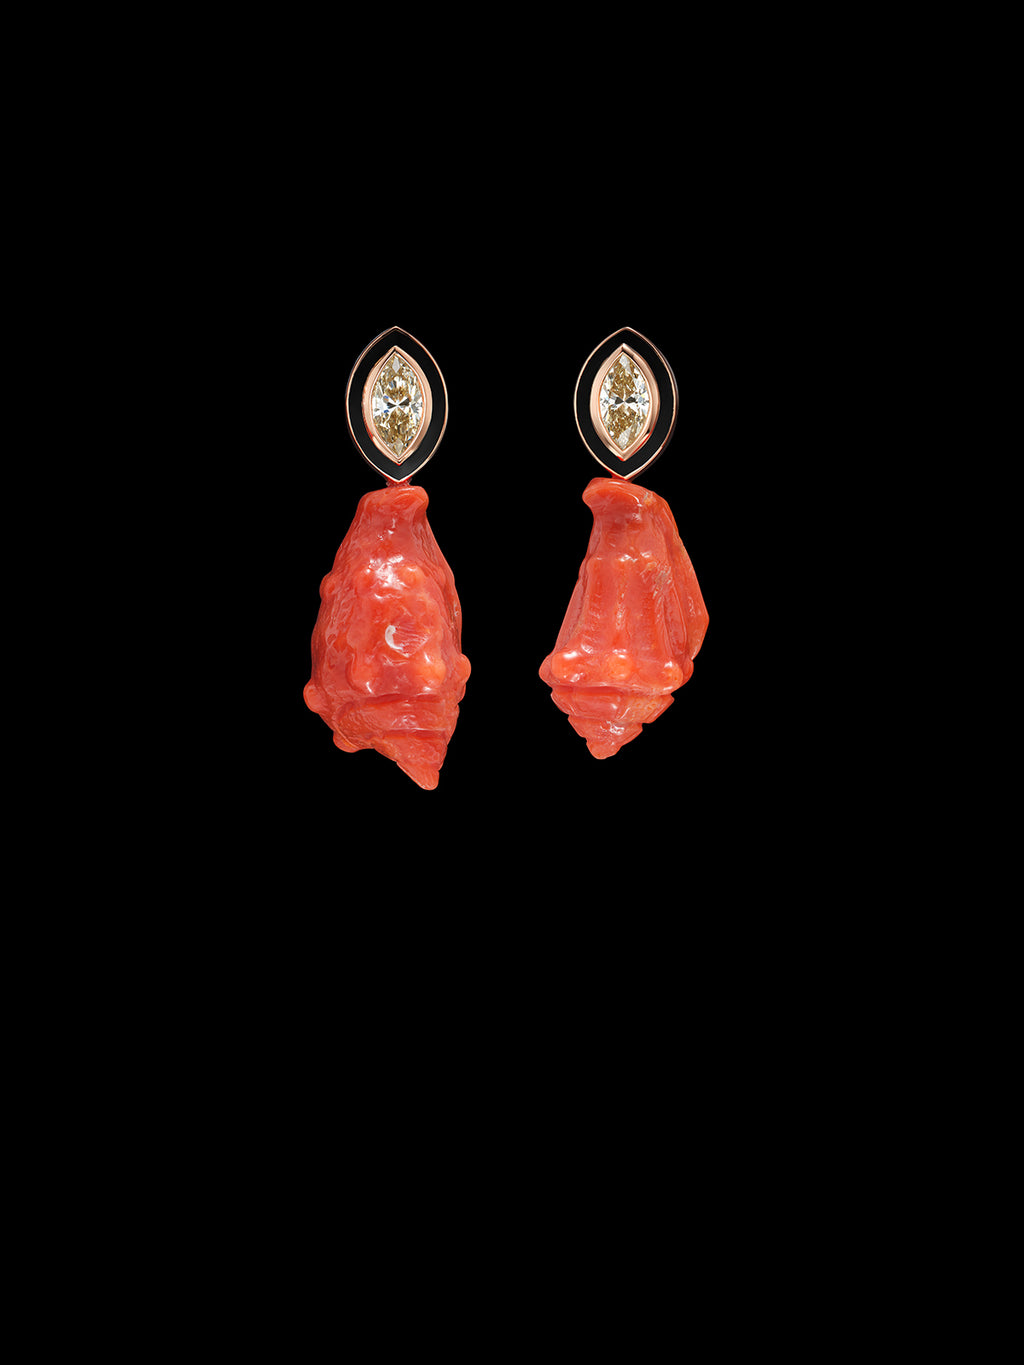 Coral Warring Earrings with Marquise Diamond